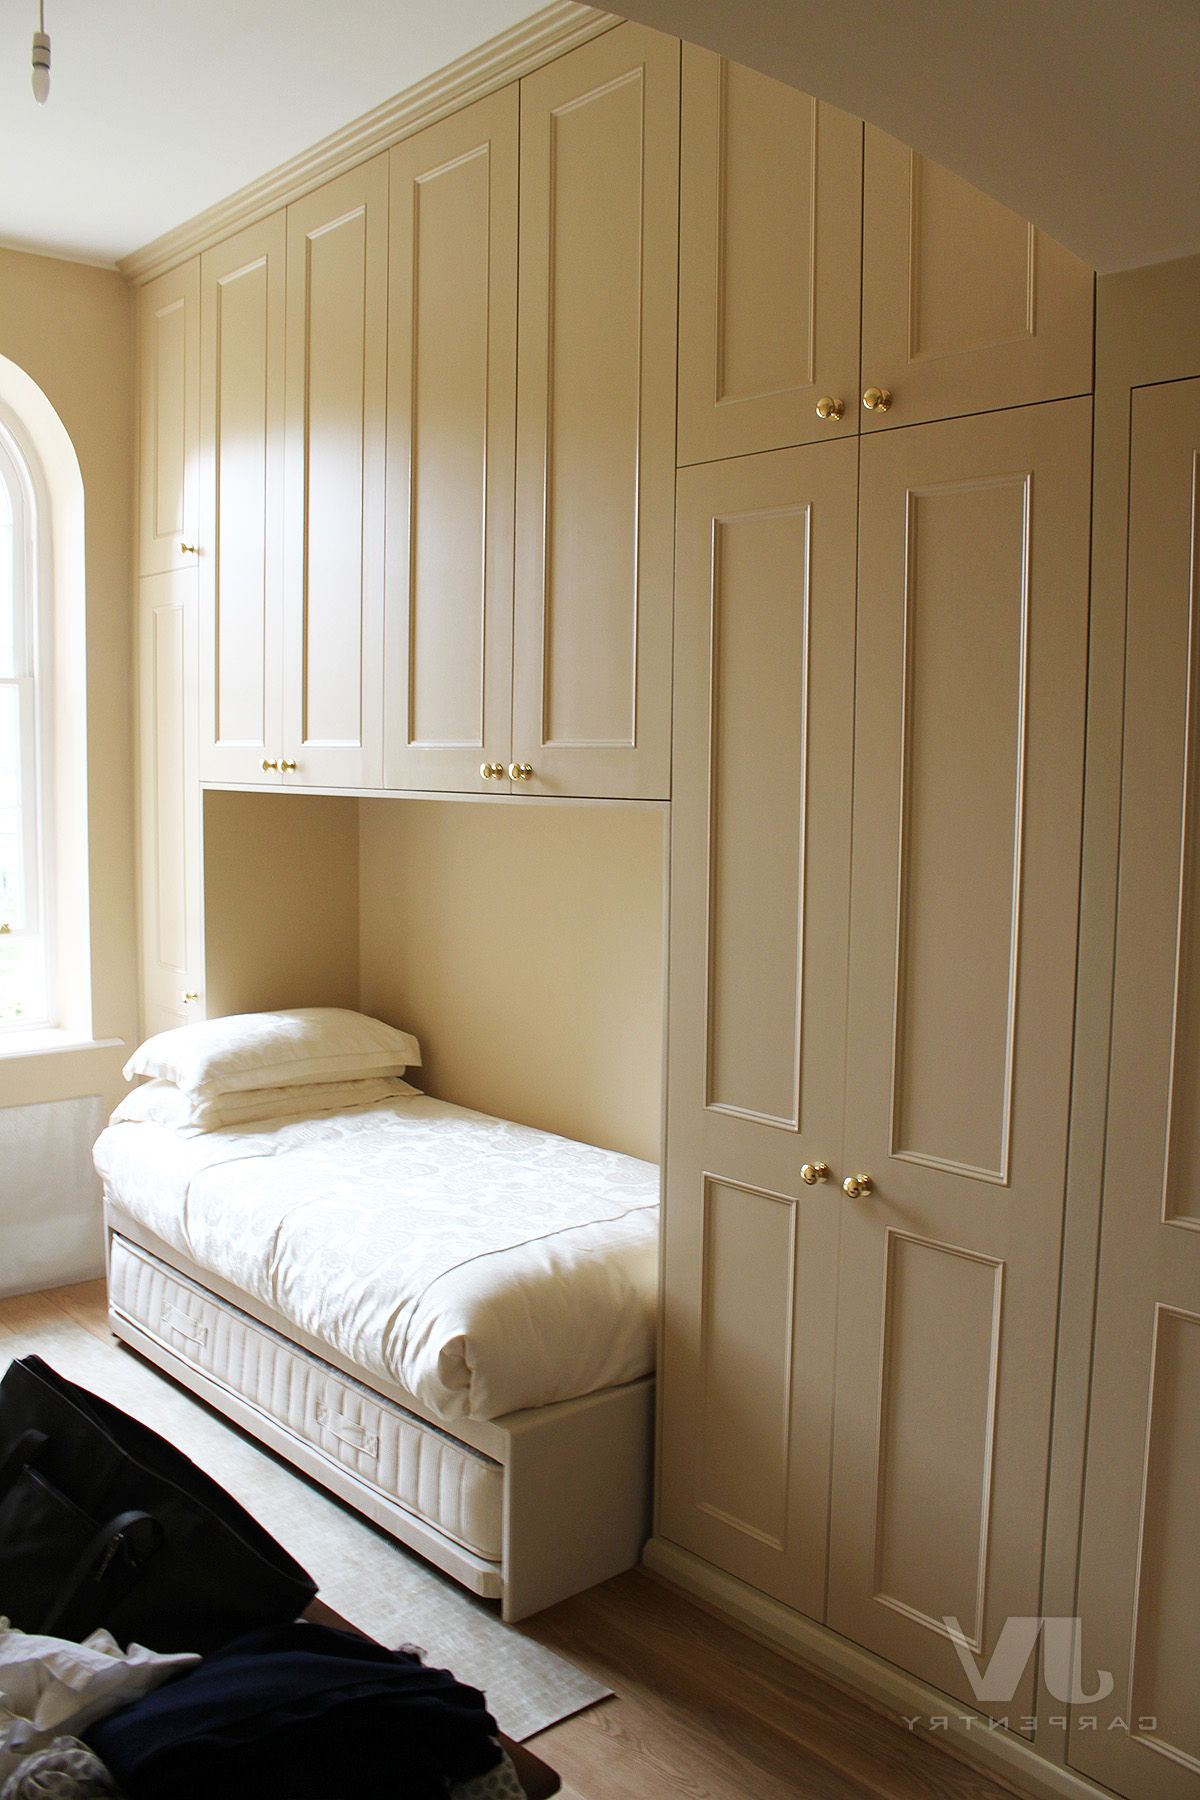 12 Fitted Wardrobes Over Bed Ideas For Your Bedroom | Jv Carpentry Throughout Wardrobes Beds (View 8 of 20)